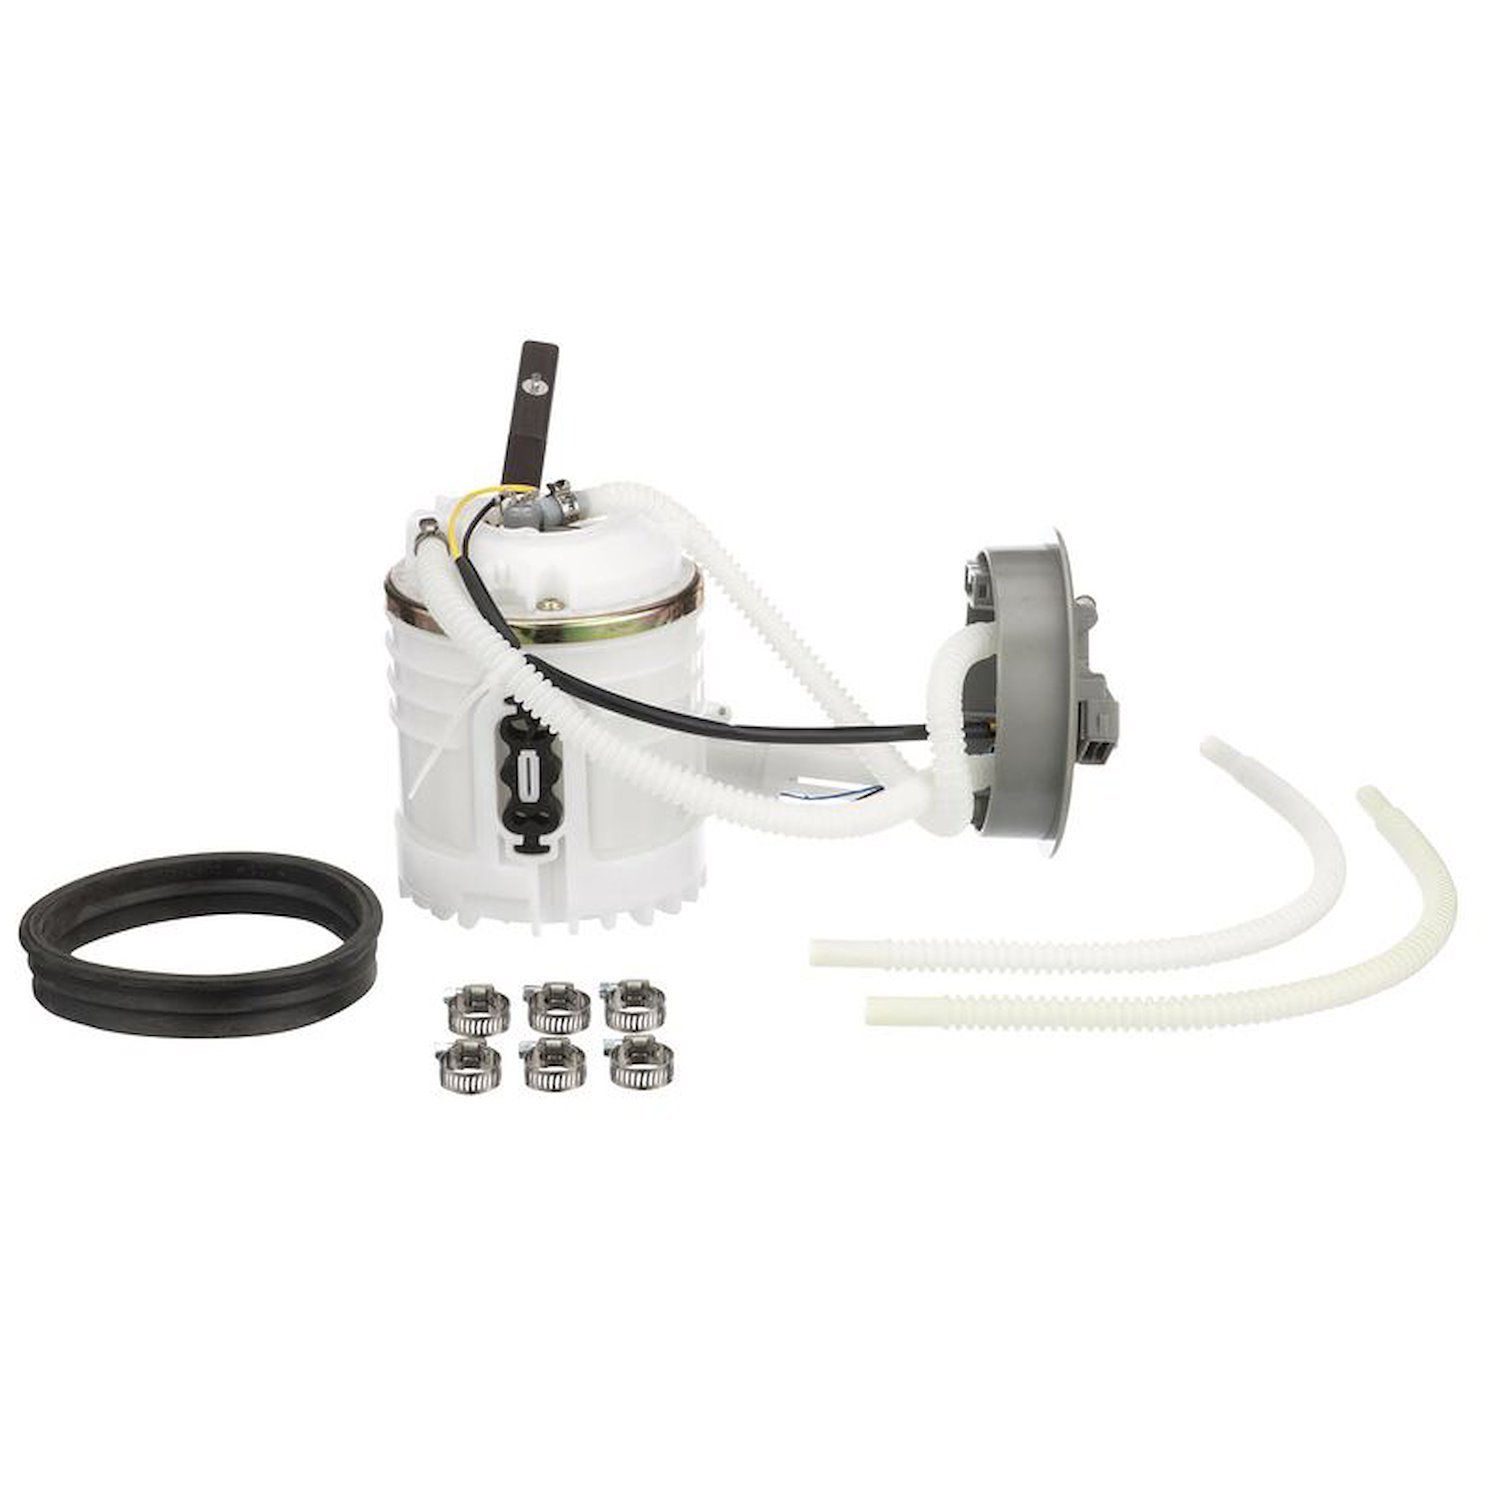 OE Replacement Electric Fuel Pump Module Assembly for 1993-1999 Volkswagen Golf/Jetta/1997-2002 Volkswagen Cabrio